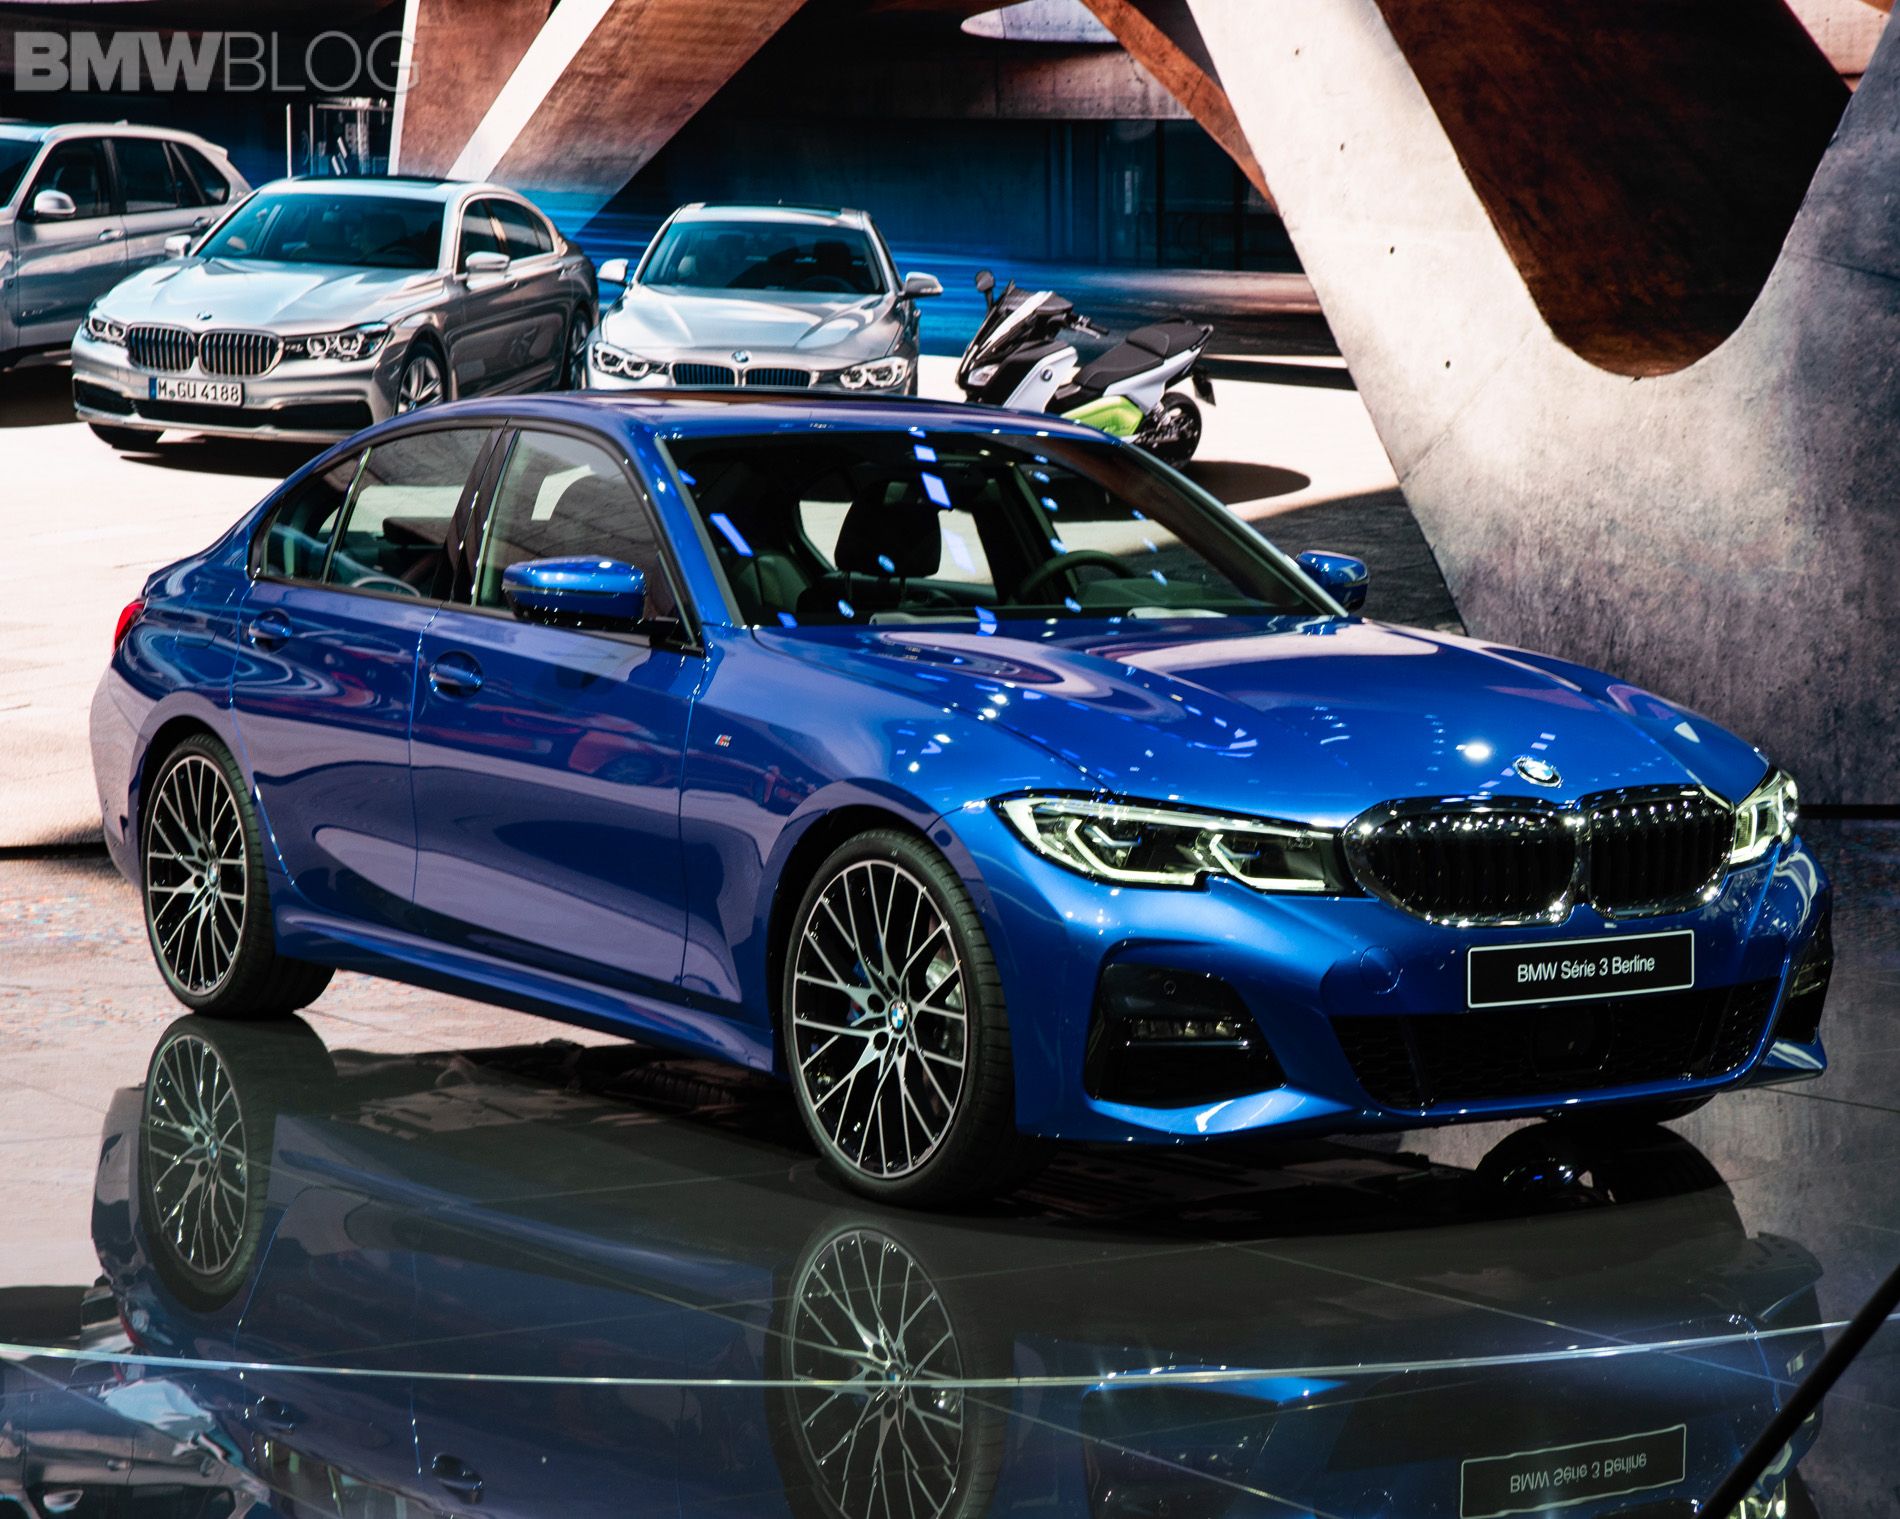 New photo of the BMW 3 Series G20 from Paris